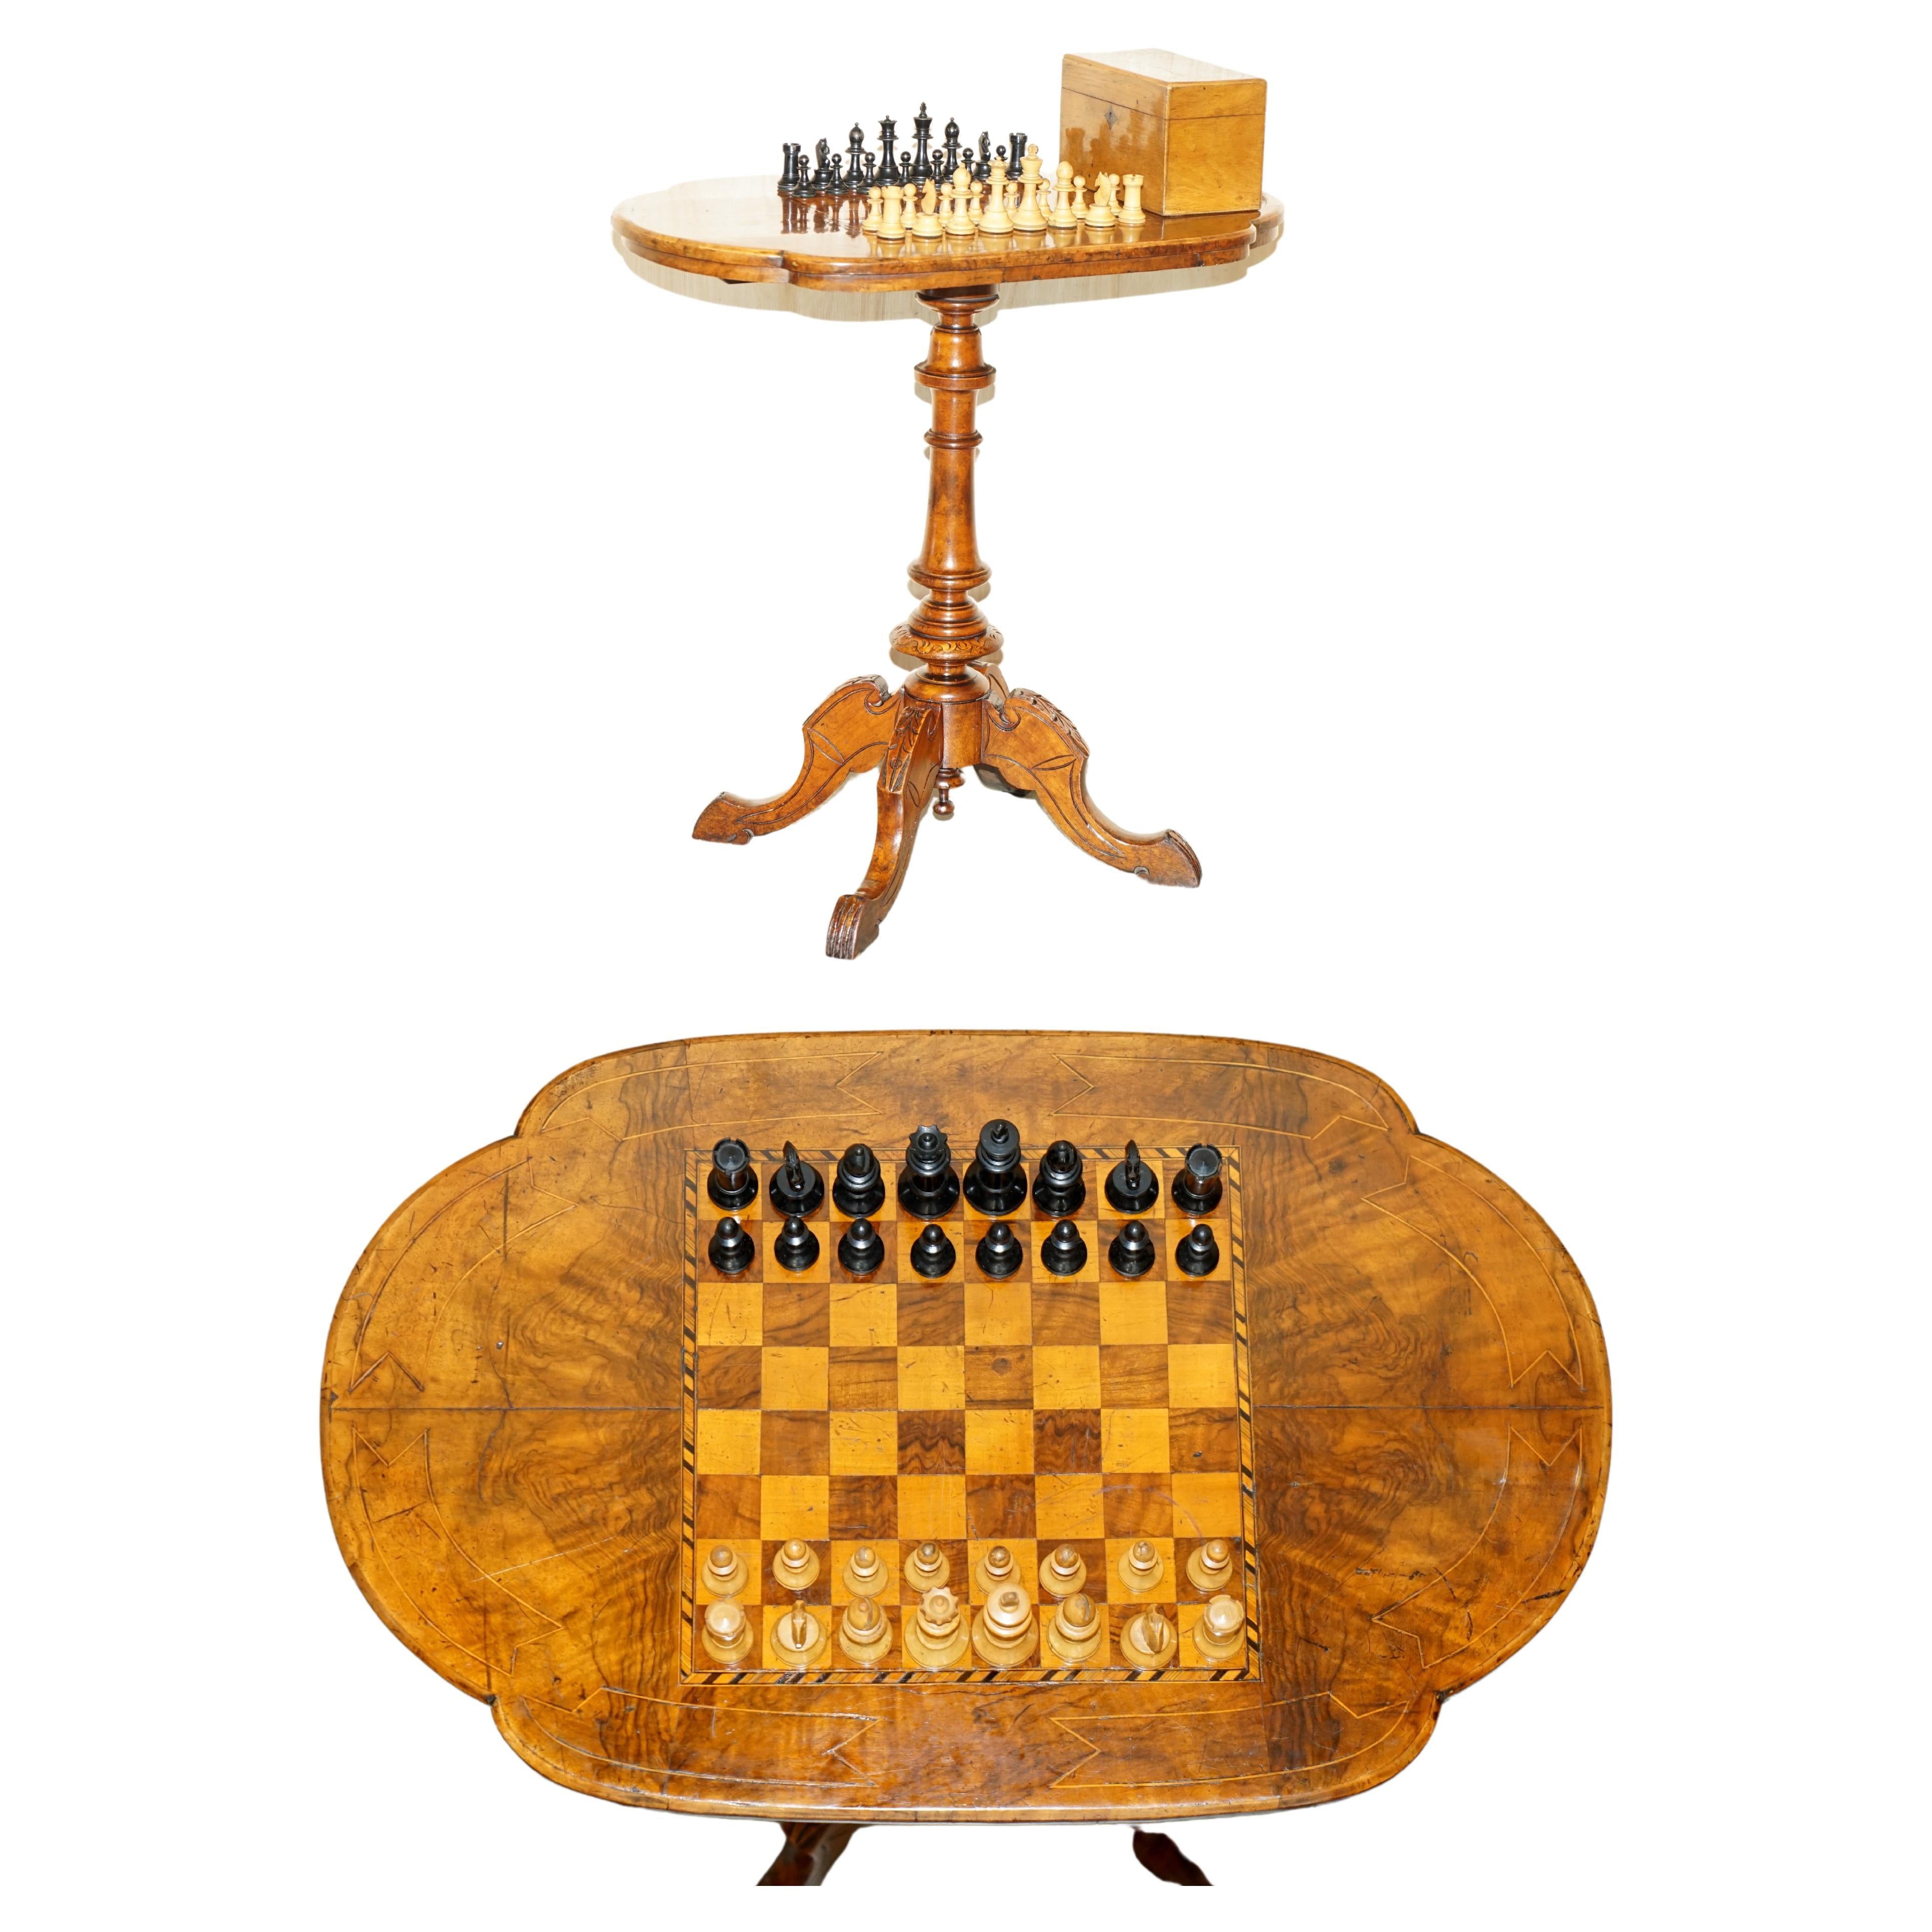 Stunning Antique Burr Walnut Chess Board Table with Staunton Chess Pieces Set For Sale